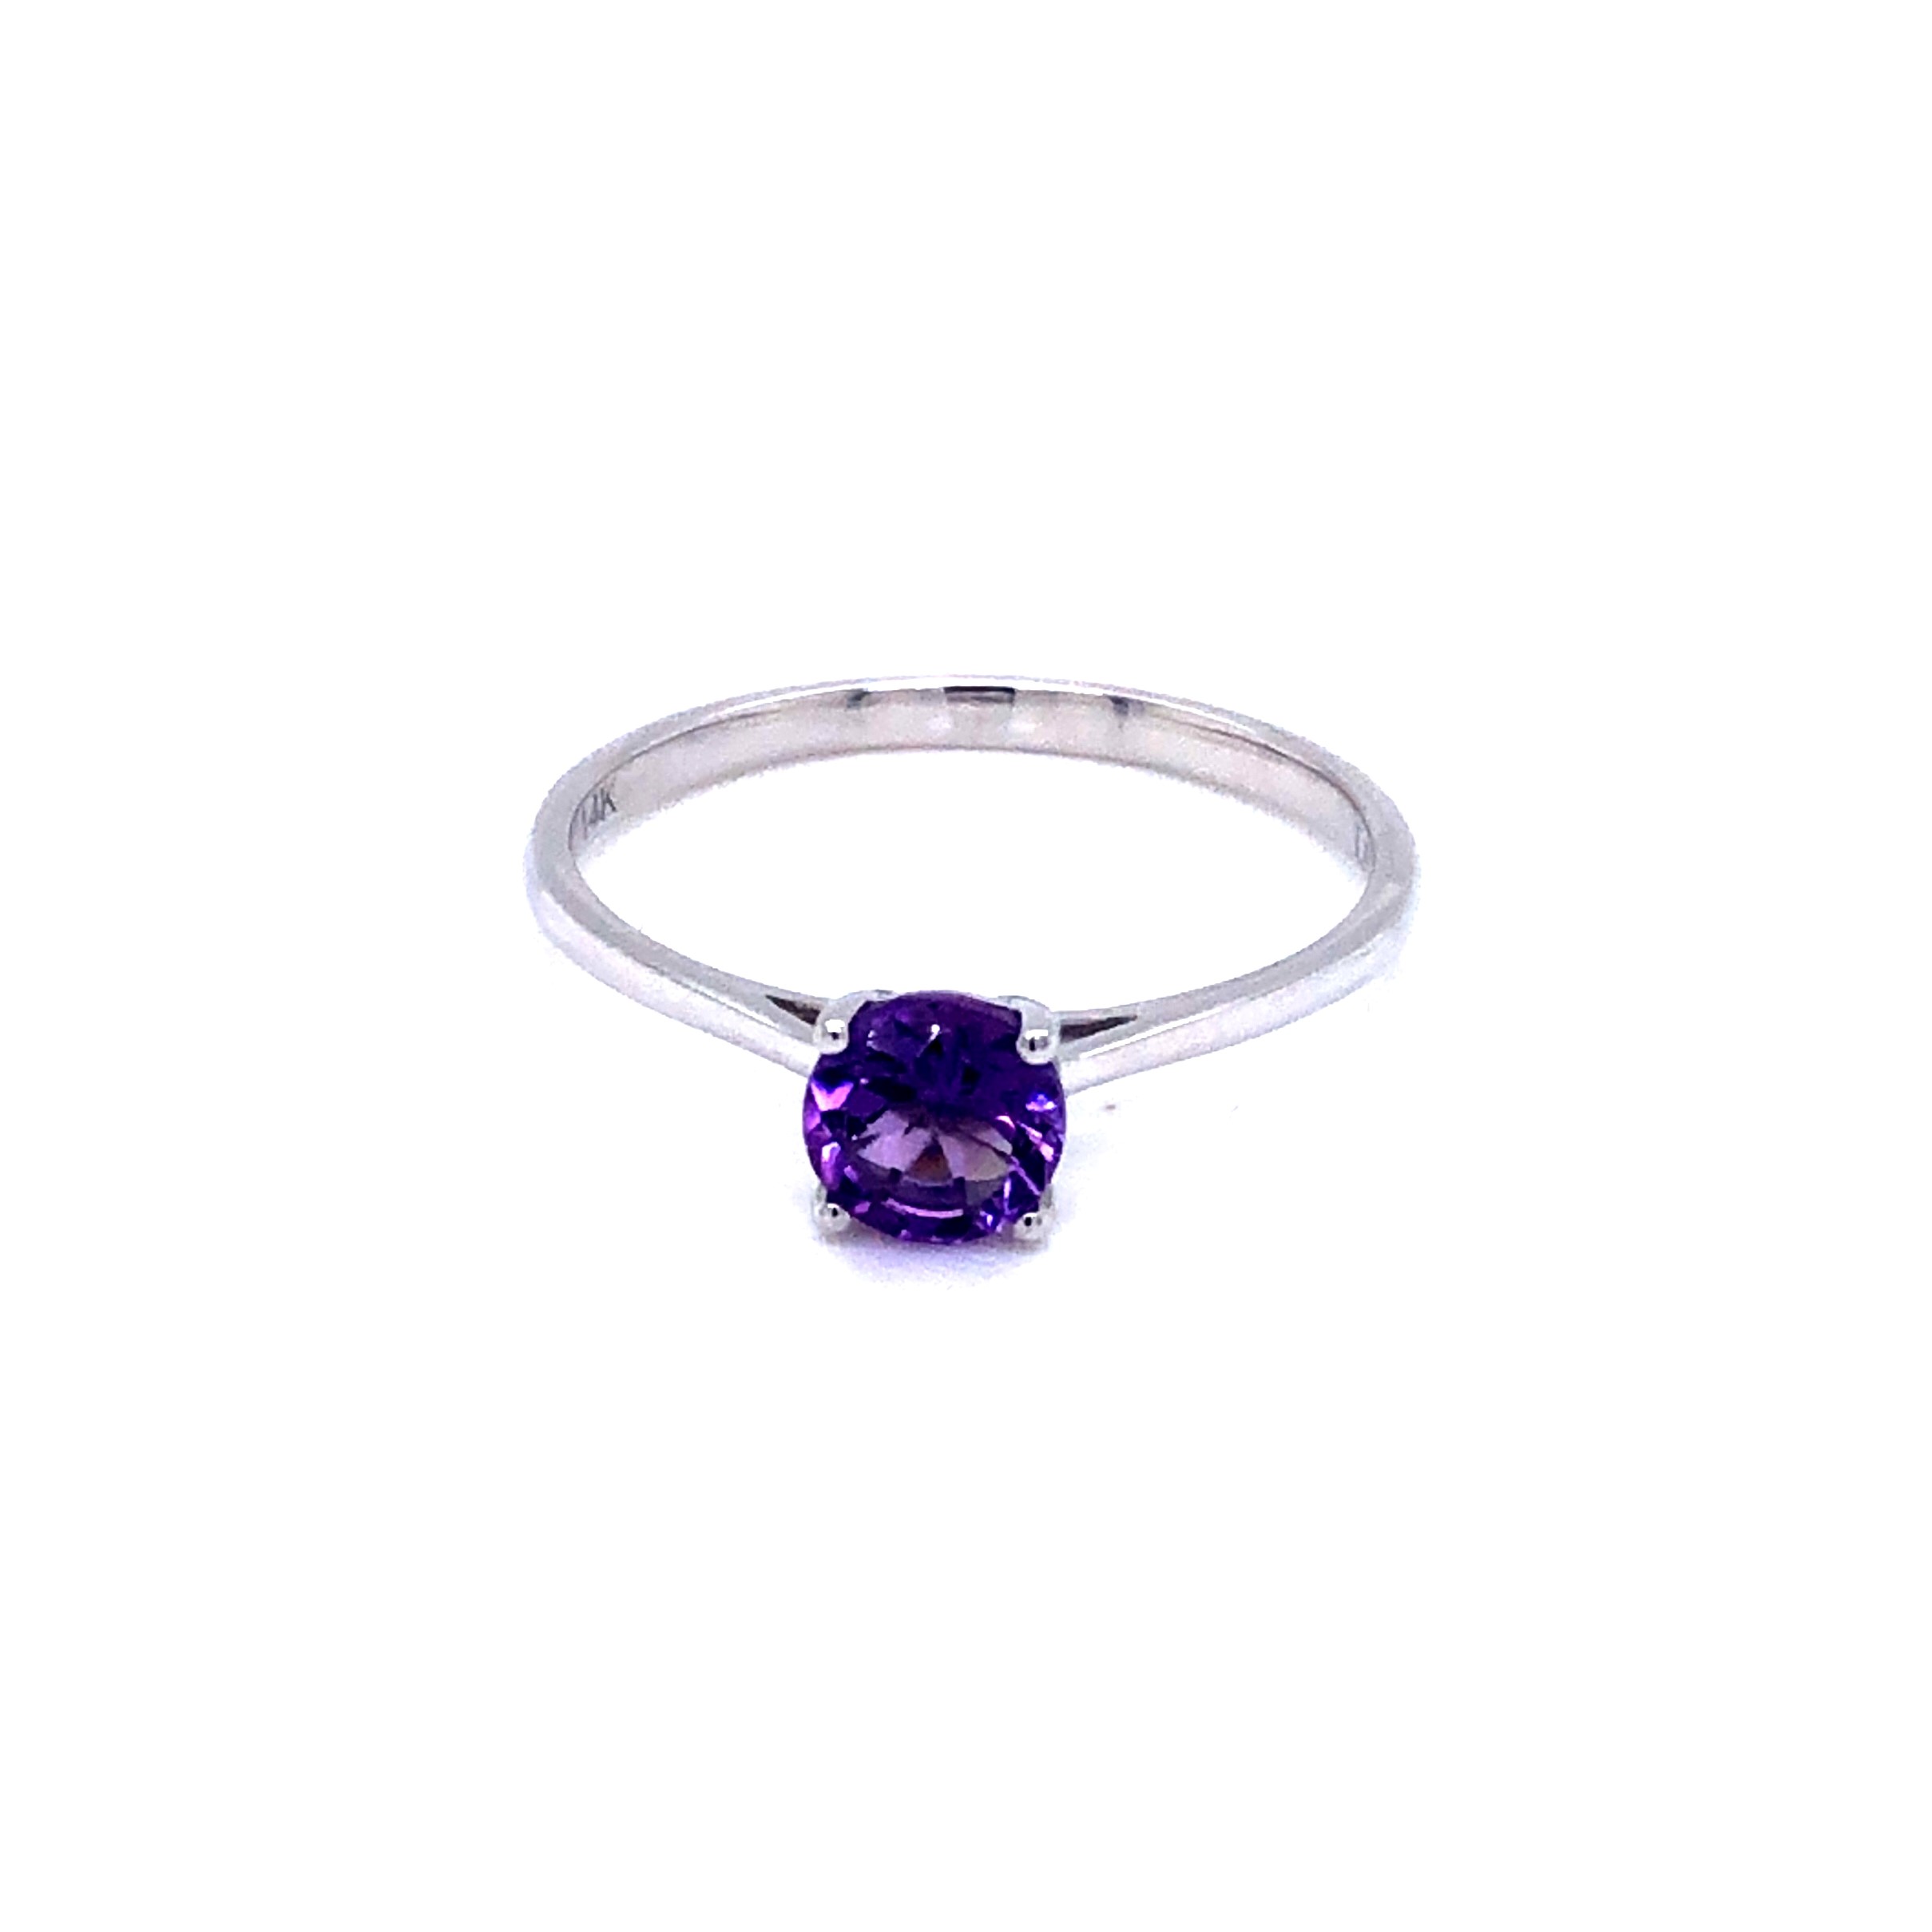 Lady s White 14 Karat Ring With One 5.00 MM Round Amethyst